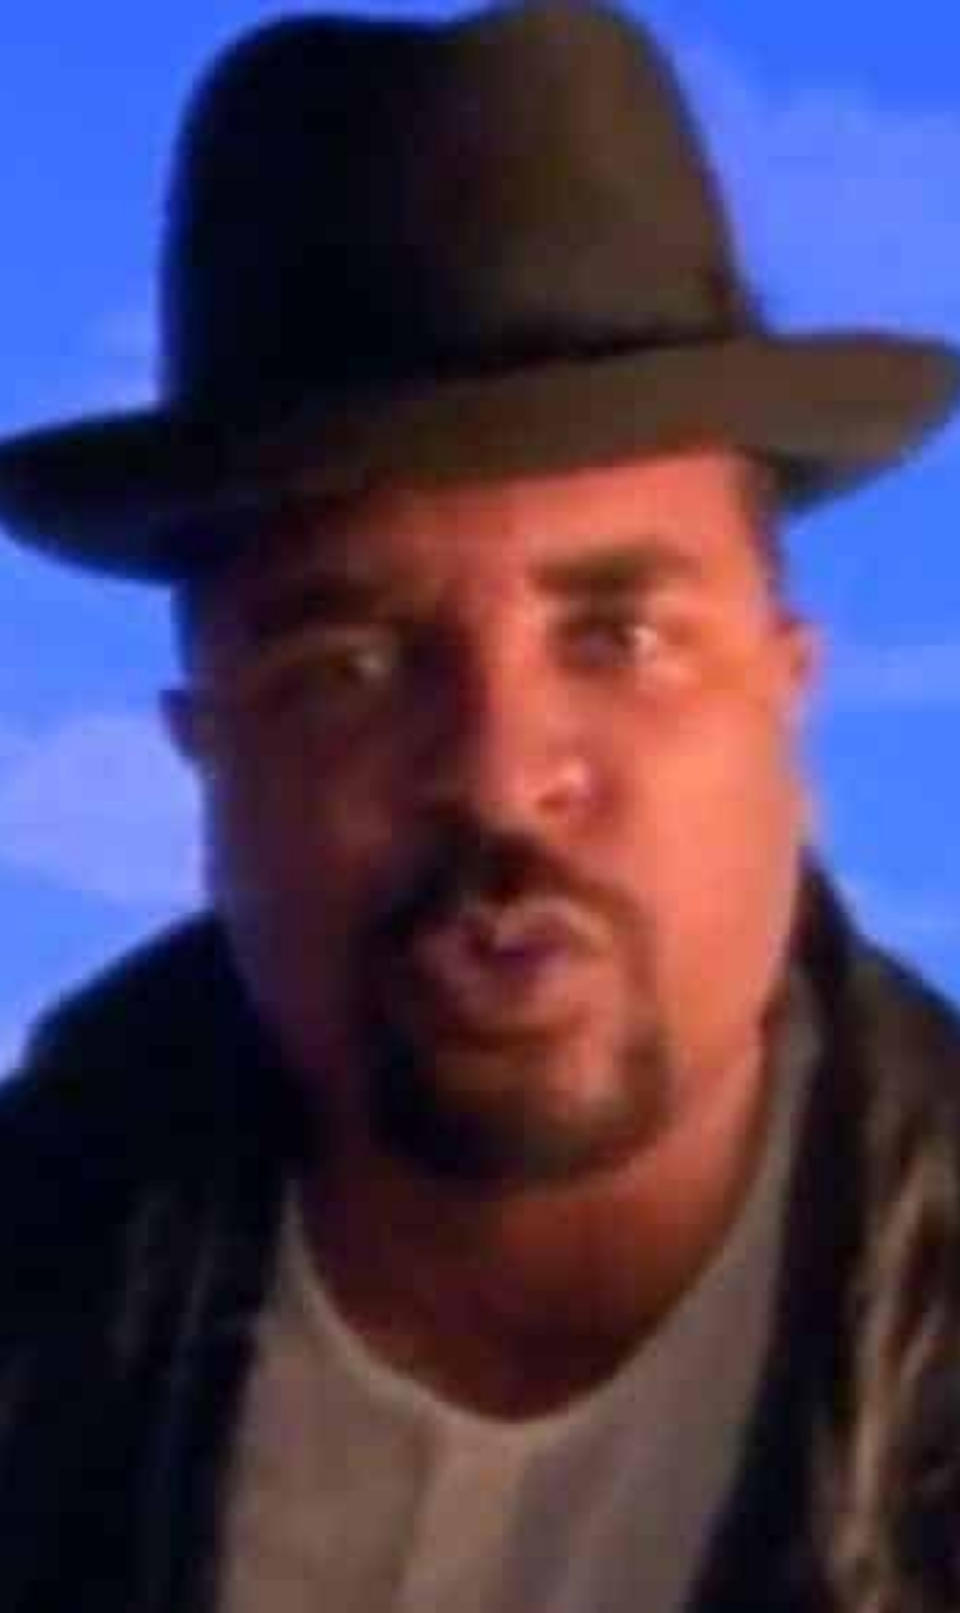 Sir Mix-a-Lot in his "Baby Got Back" music video